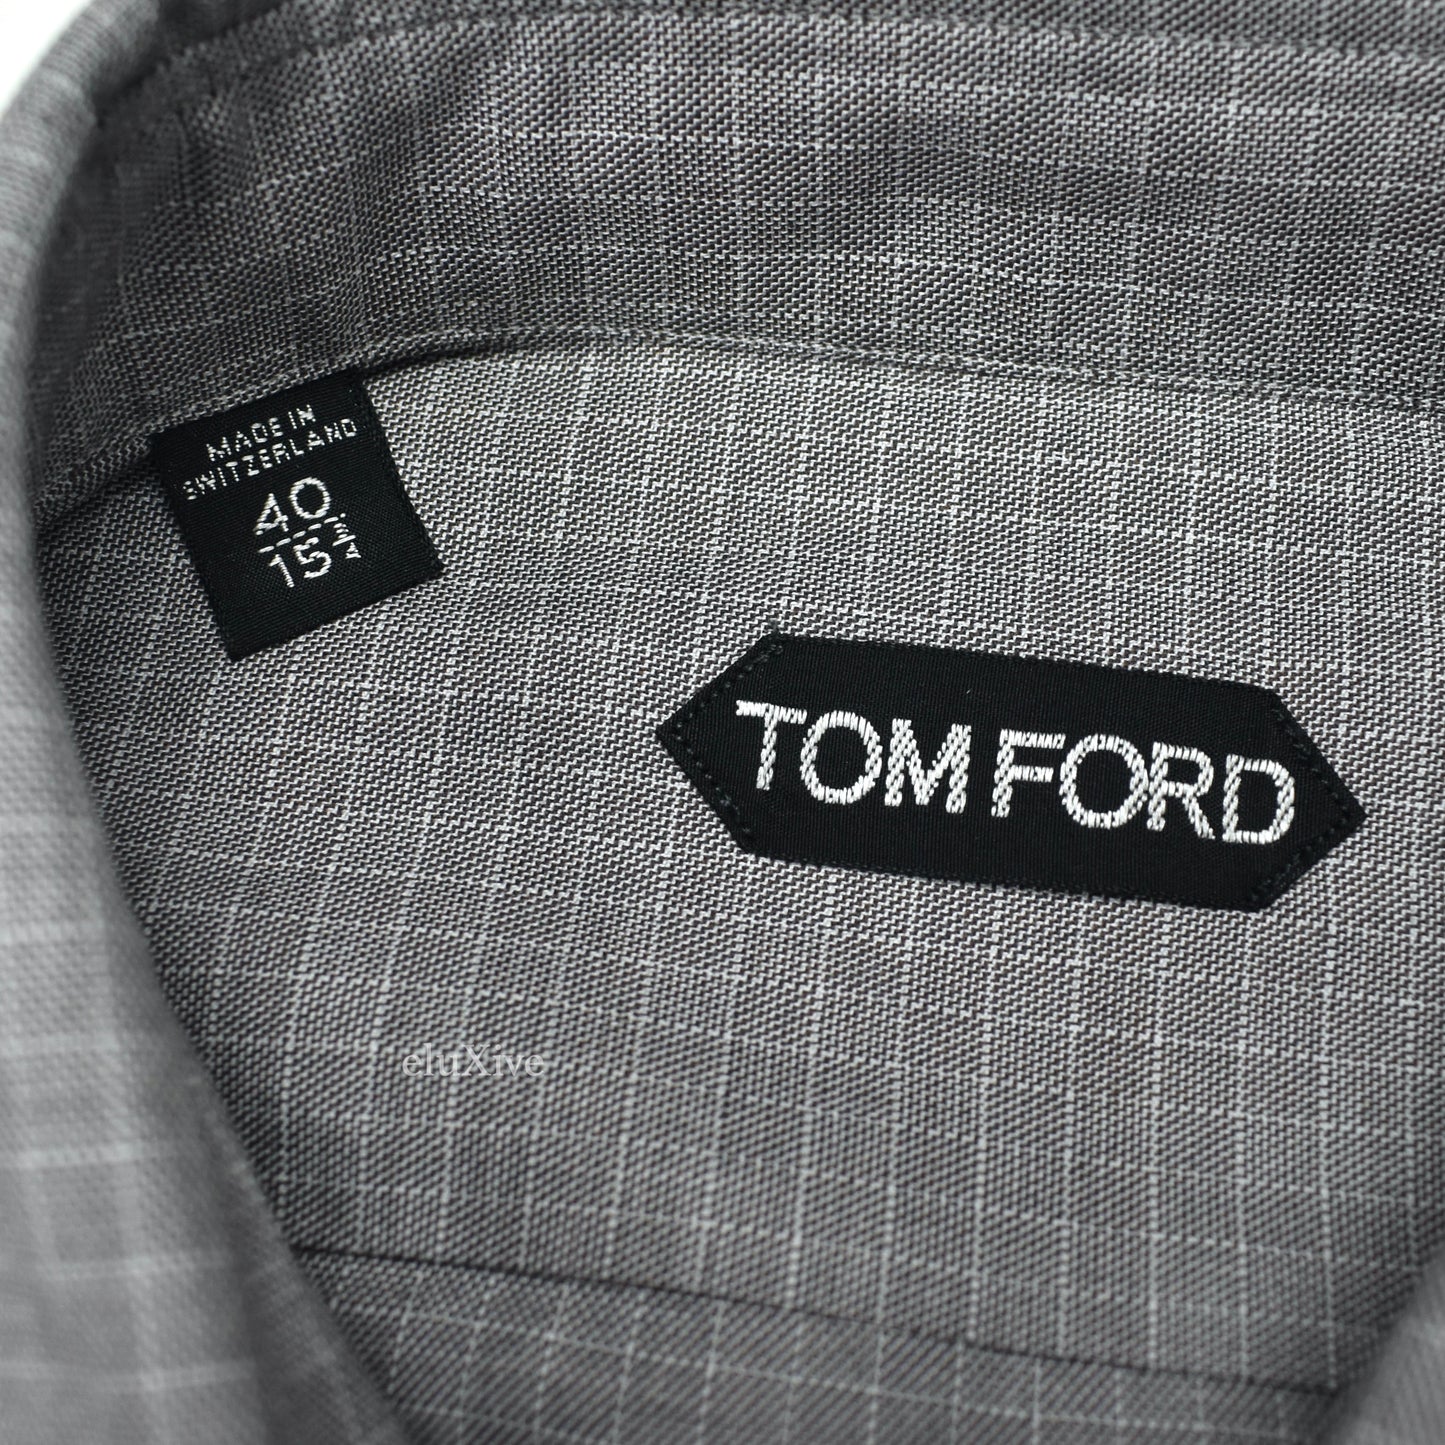 Tom Ford - Brown Zigzag Woven Button Down Shirt